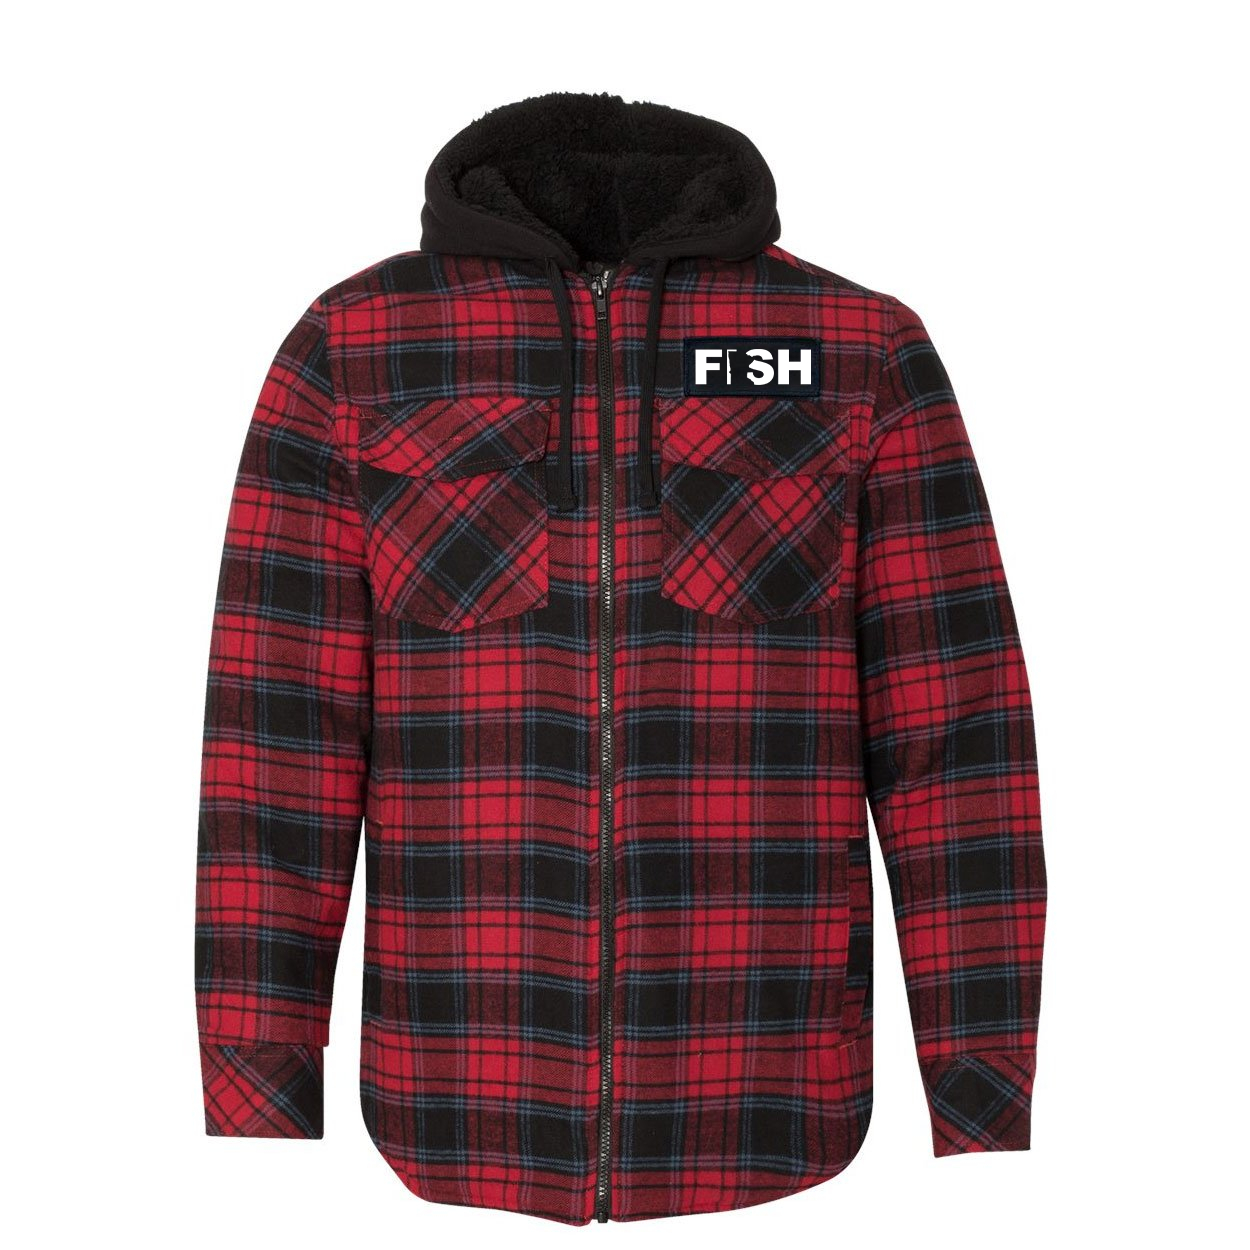 Fish Minnesota Classic Unisex Full Zip Woven Patch Hooded Flannel Jacket Red/Black Buffalo (White Logo)